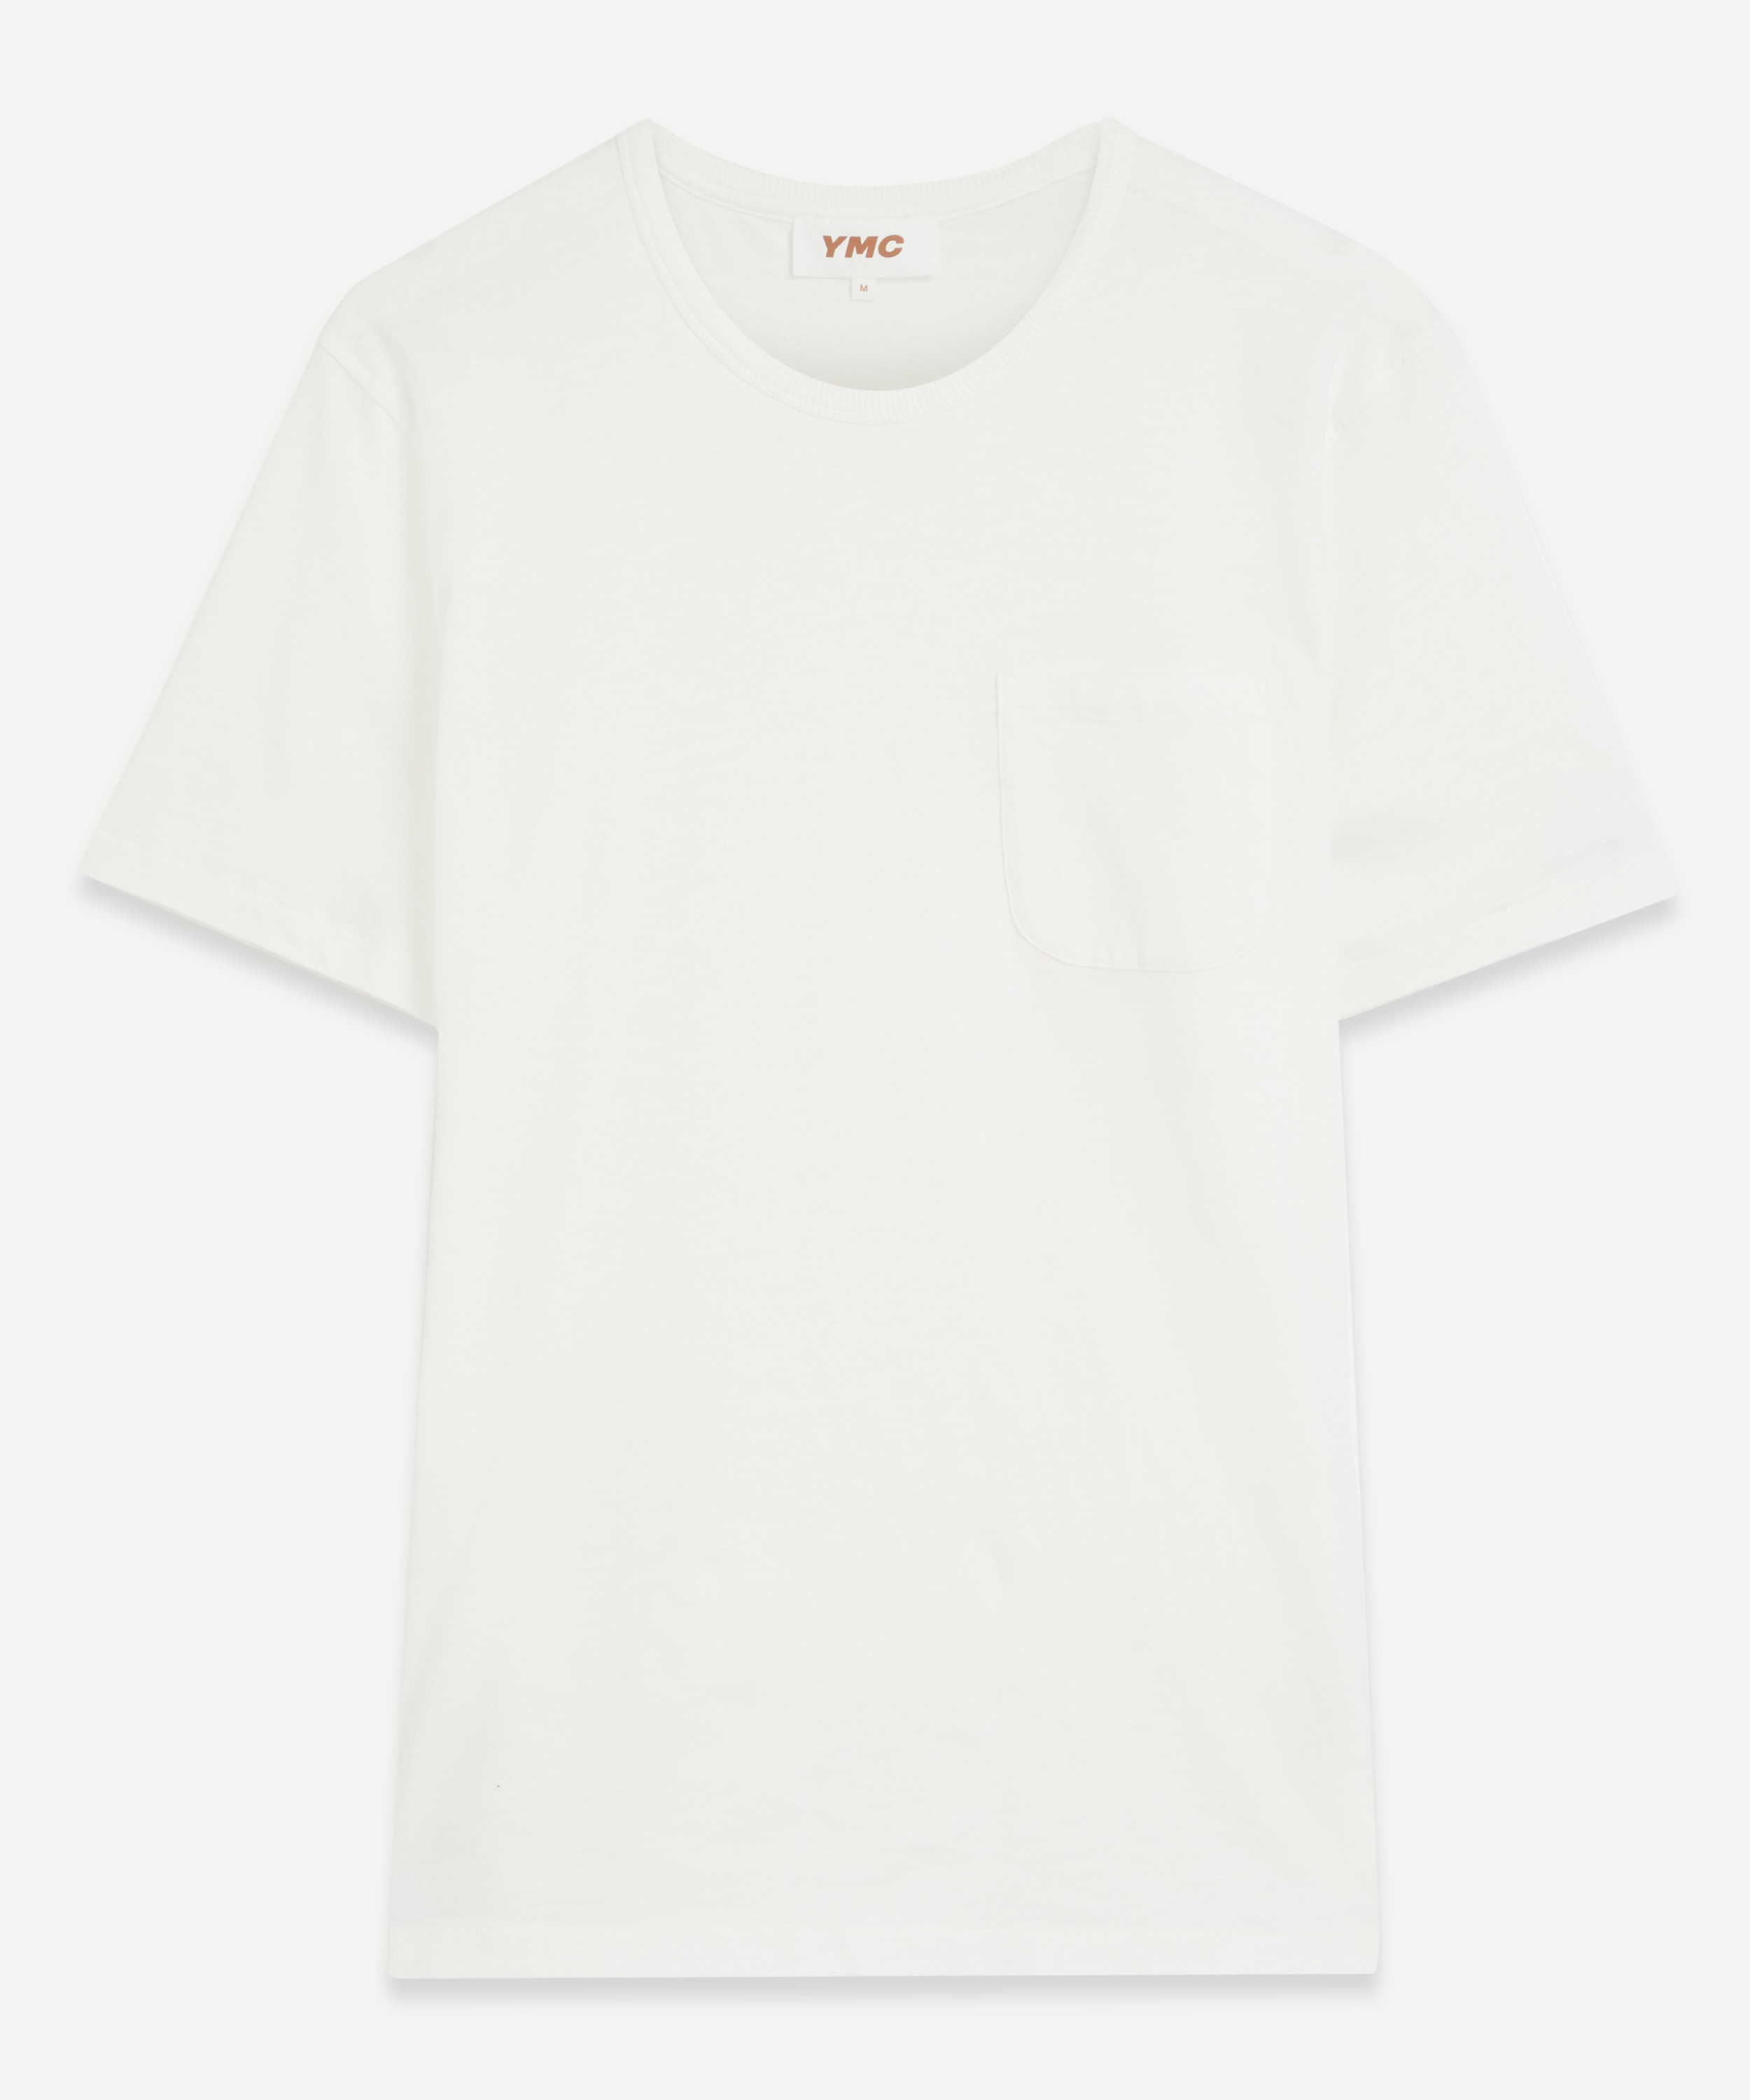 YMC - Wild Ones T-Shirt image number null